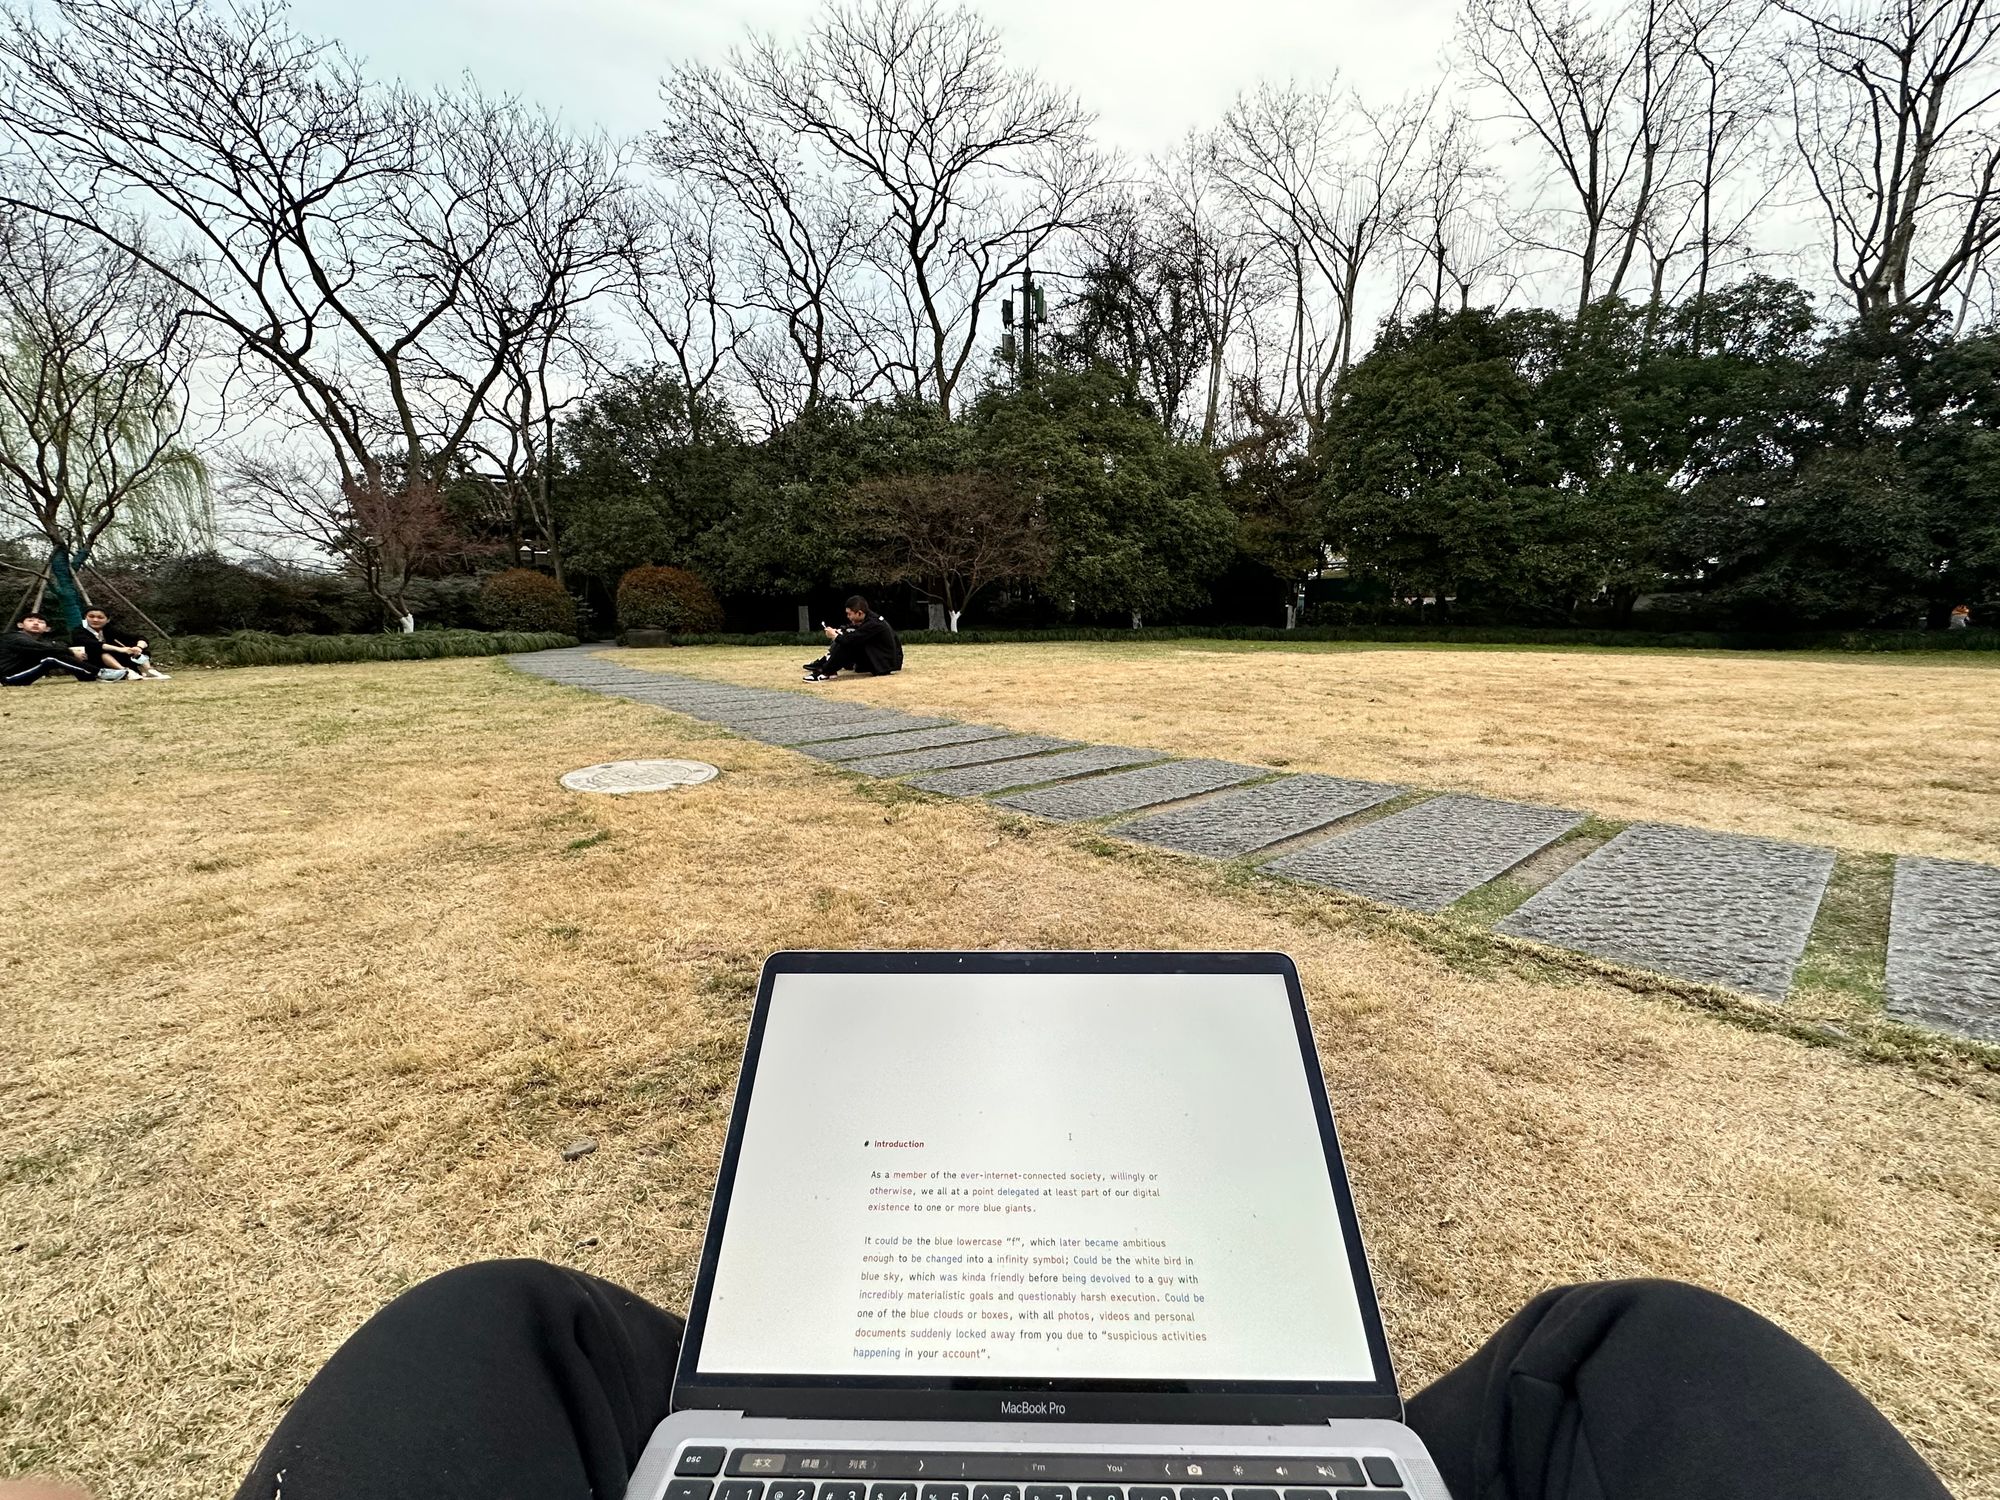 Sitting on a lawn, writing blog posts on my computer.